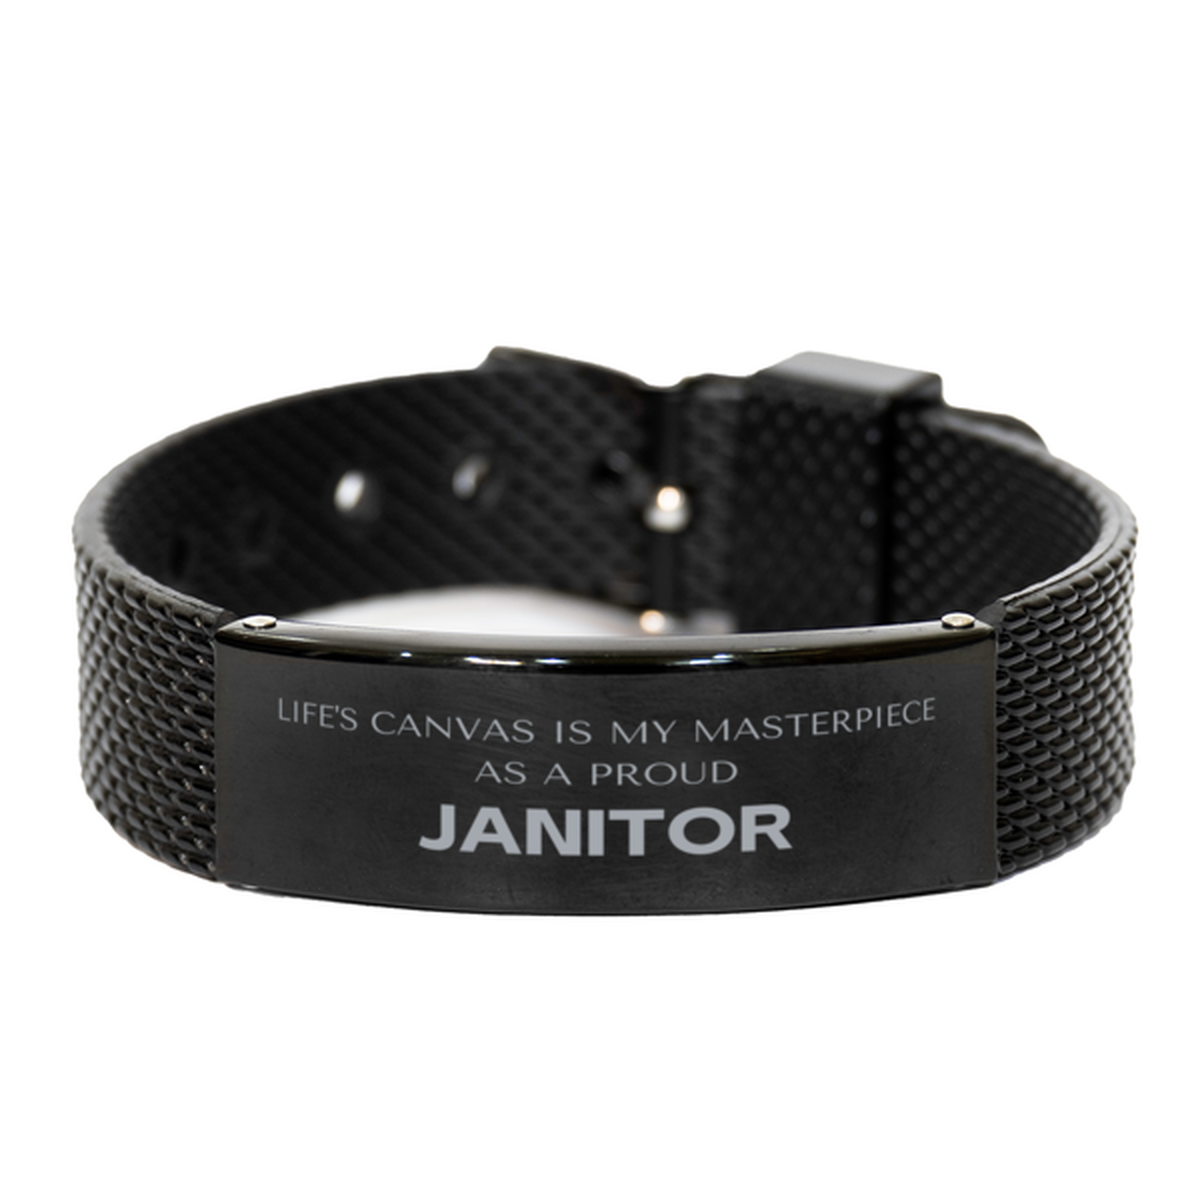 Proud Janitor Gifts, Life's canvas is my masterpiece, Epic Birthday Christmas Unique Black Shark Mesh Bracelet For Janitor, Coworkers, Men, Women, Friends